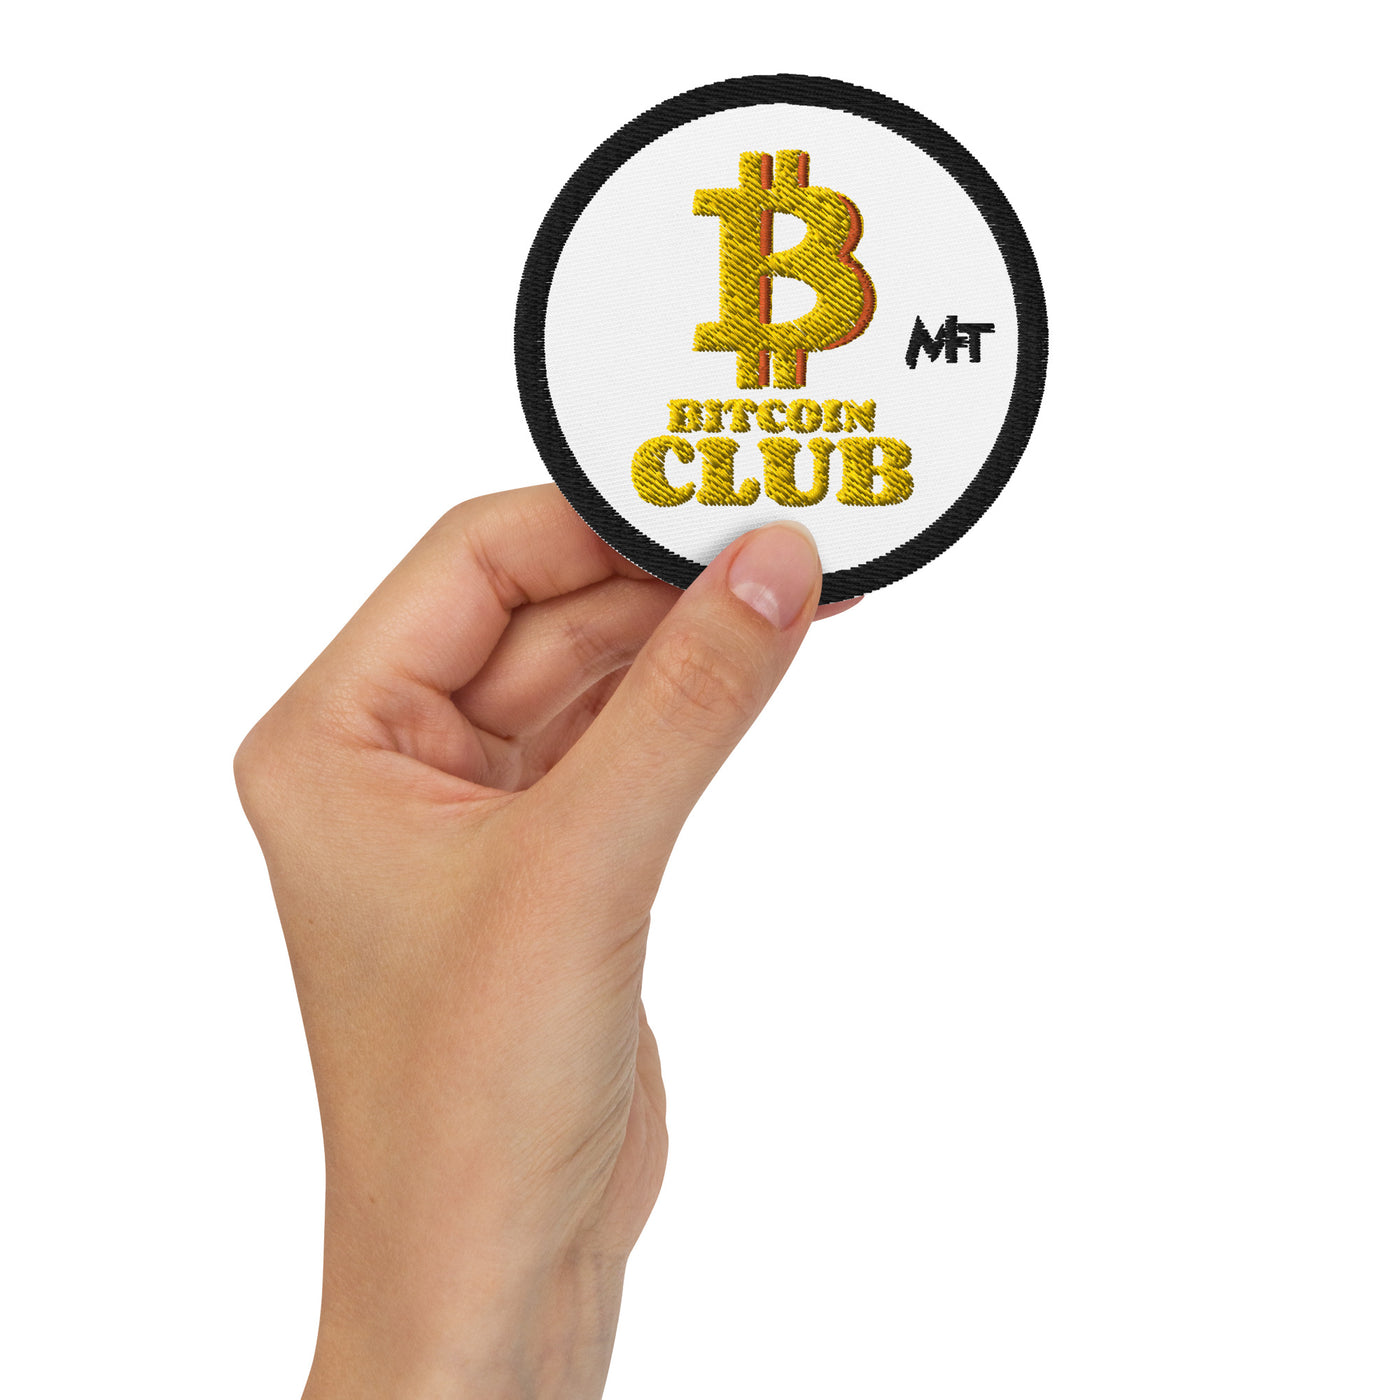 BITCOIN CLUB V5 - Embroidered patches